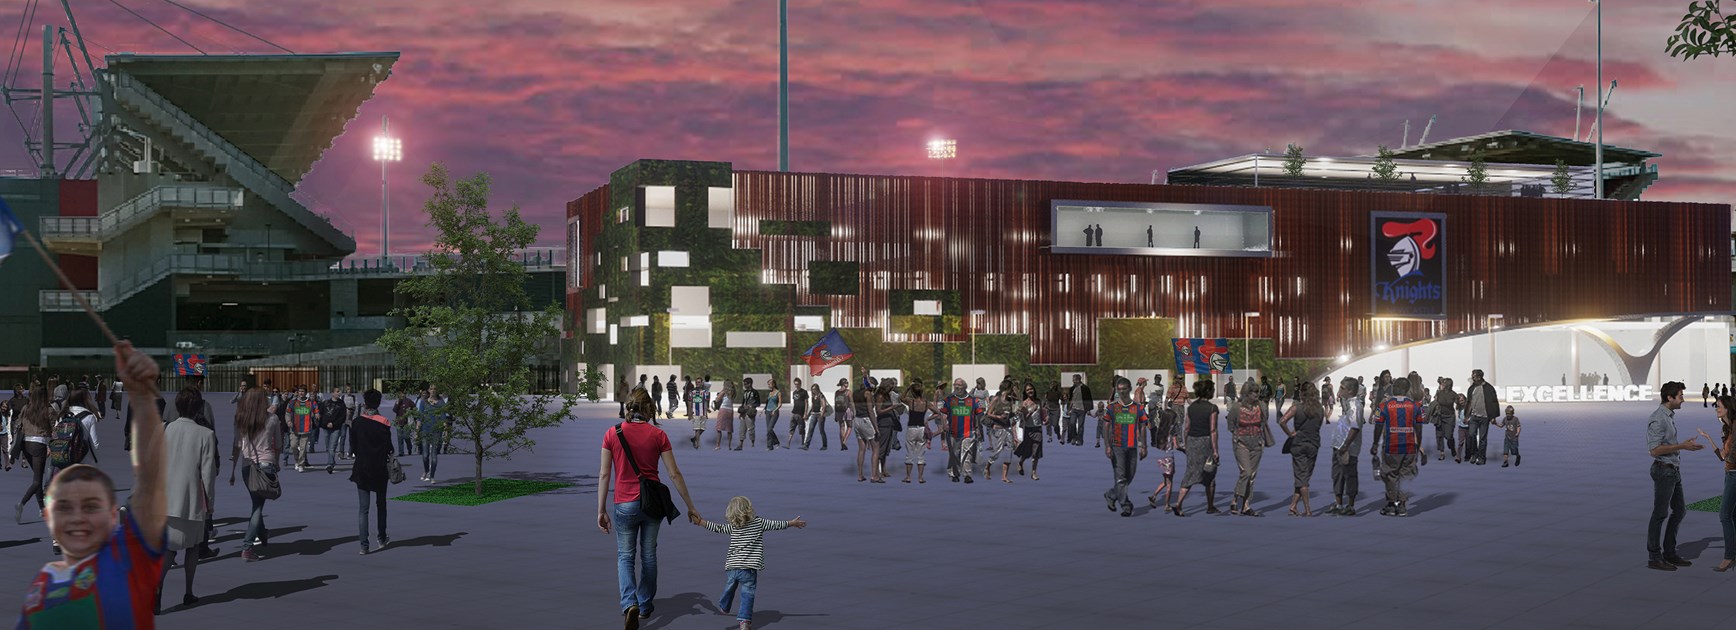 First look: Knights $20m Centre of Excellence revealed